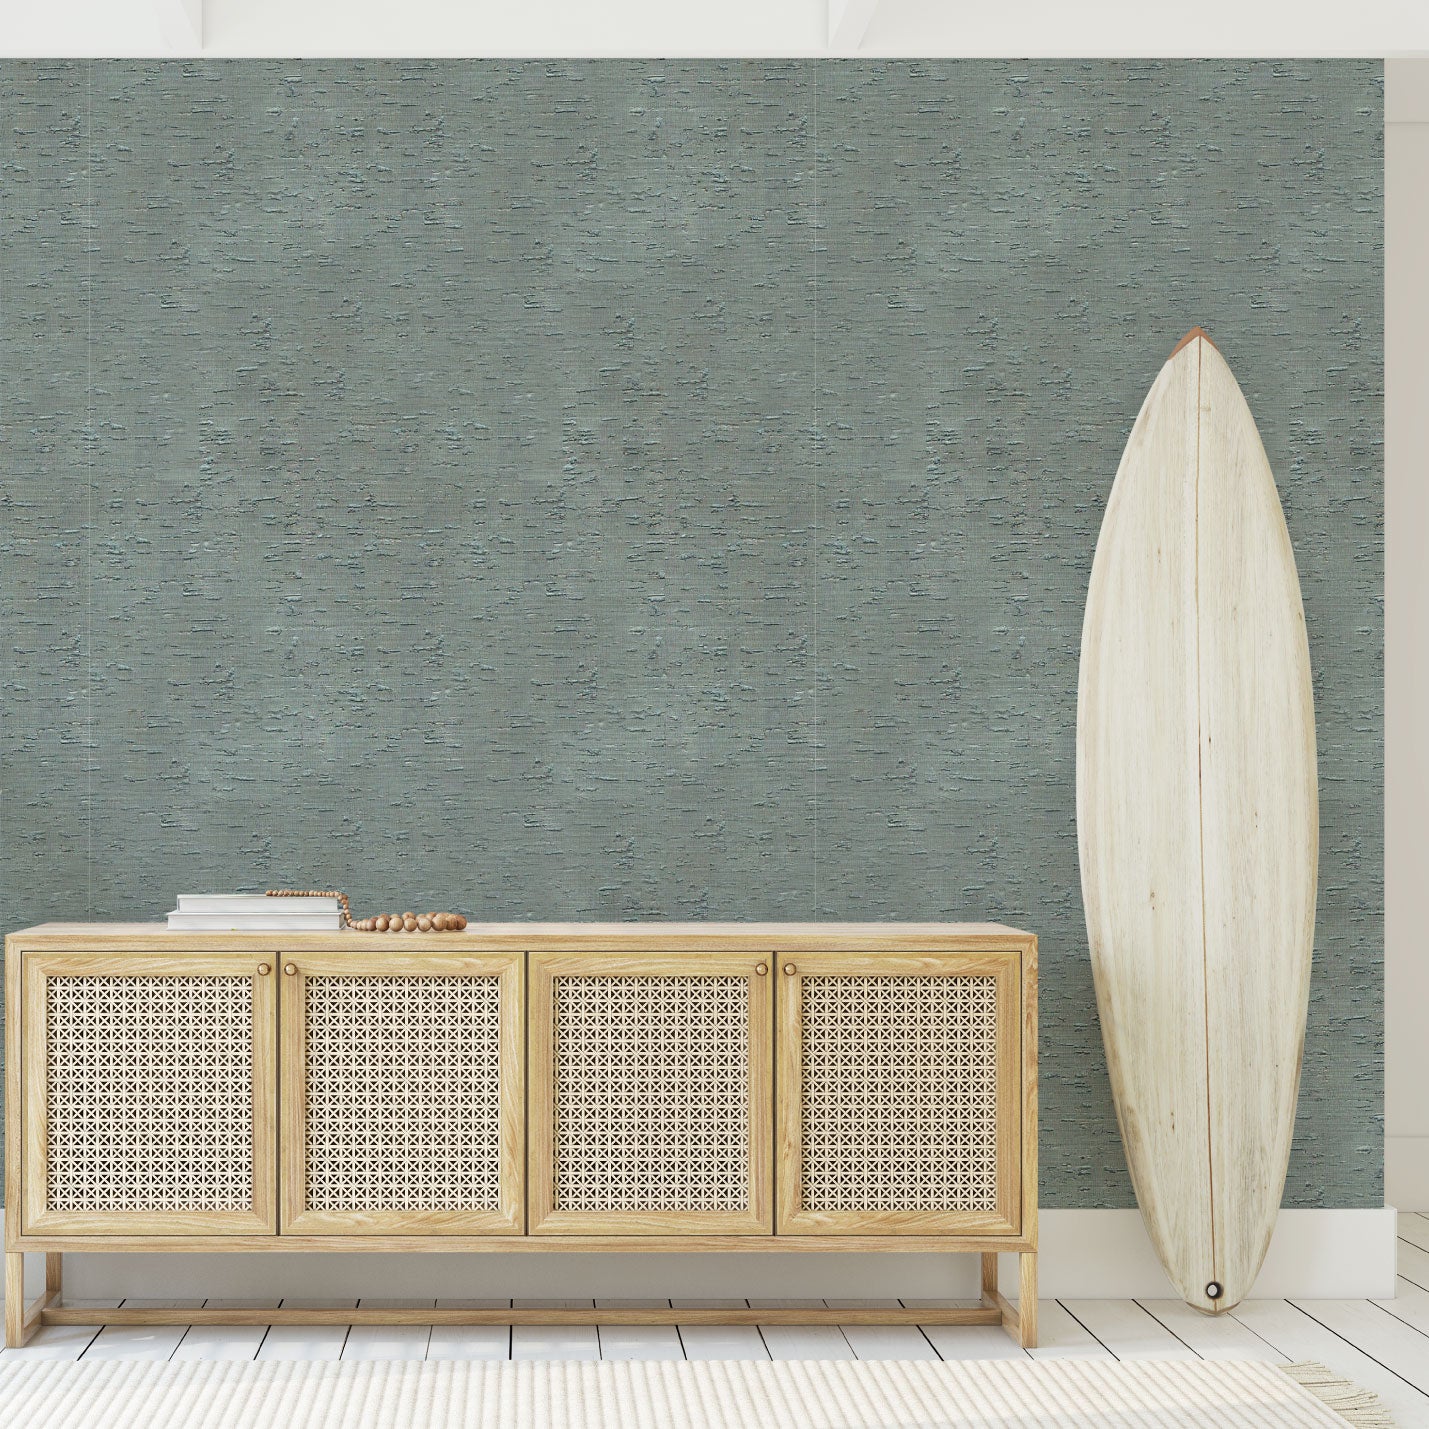 cork wallpaper Natural Textured Eco-Friendly Non-toxic High-quality  Sustainable Interior Design Bold Custom Tailor-made Retro chic Luxury Contemporary Bespoke metallic nature blue teal woodgrain entrance foyer surf credenza